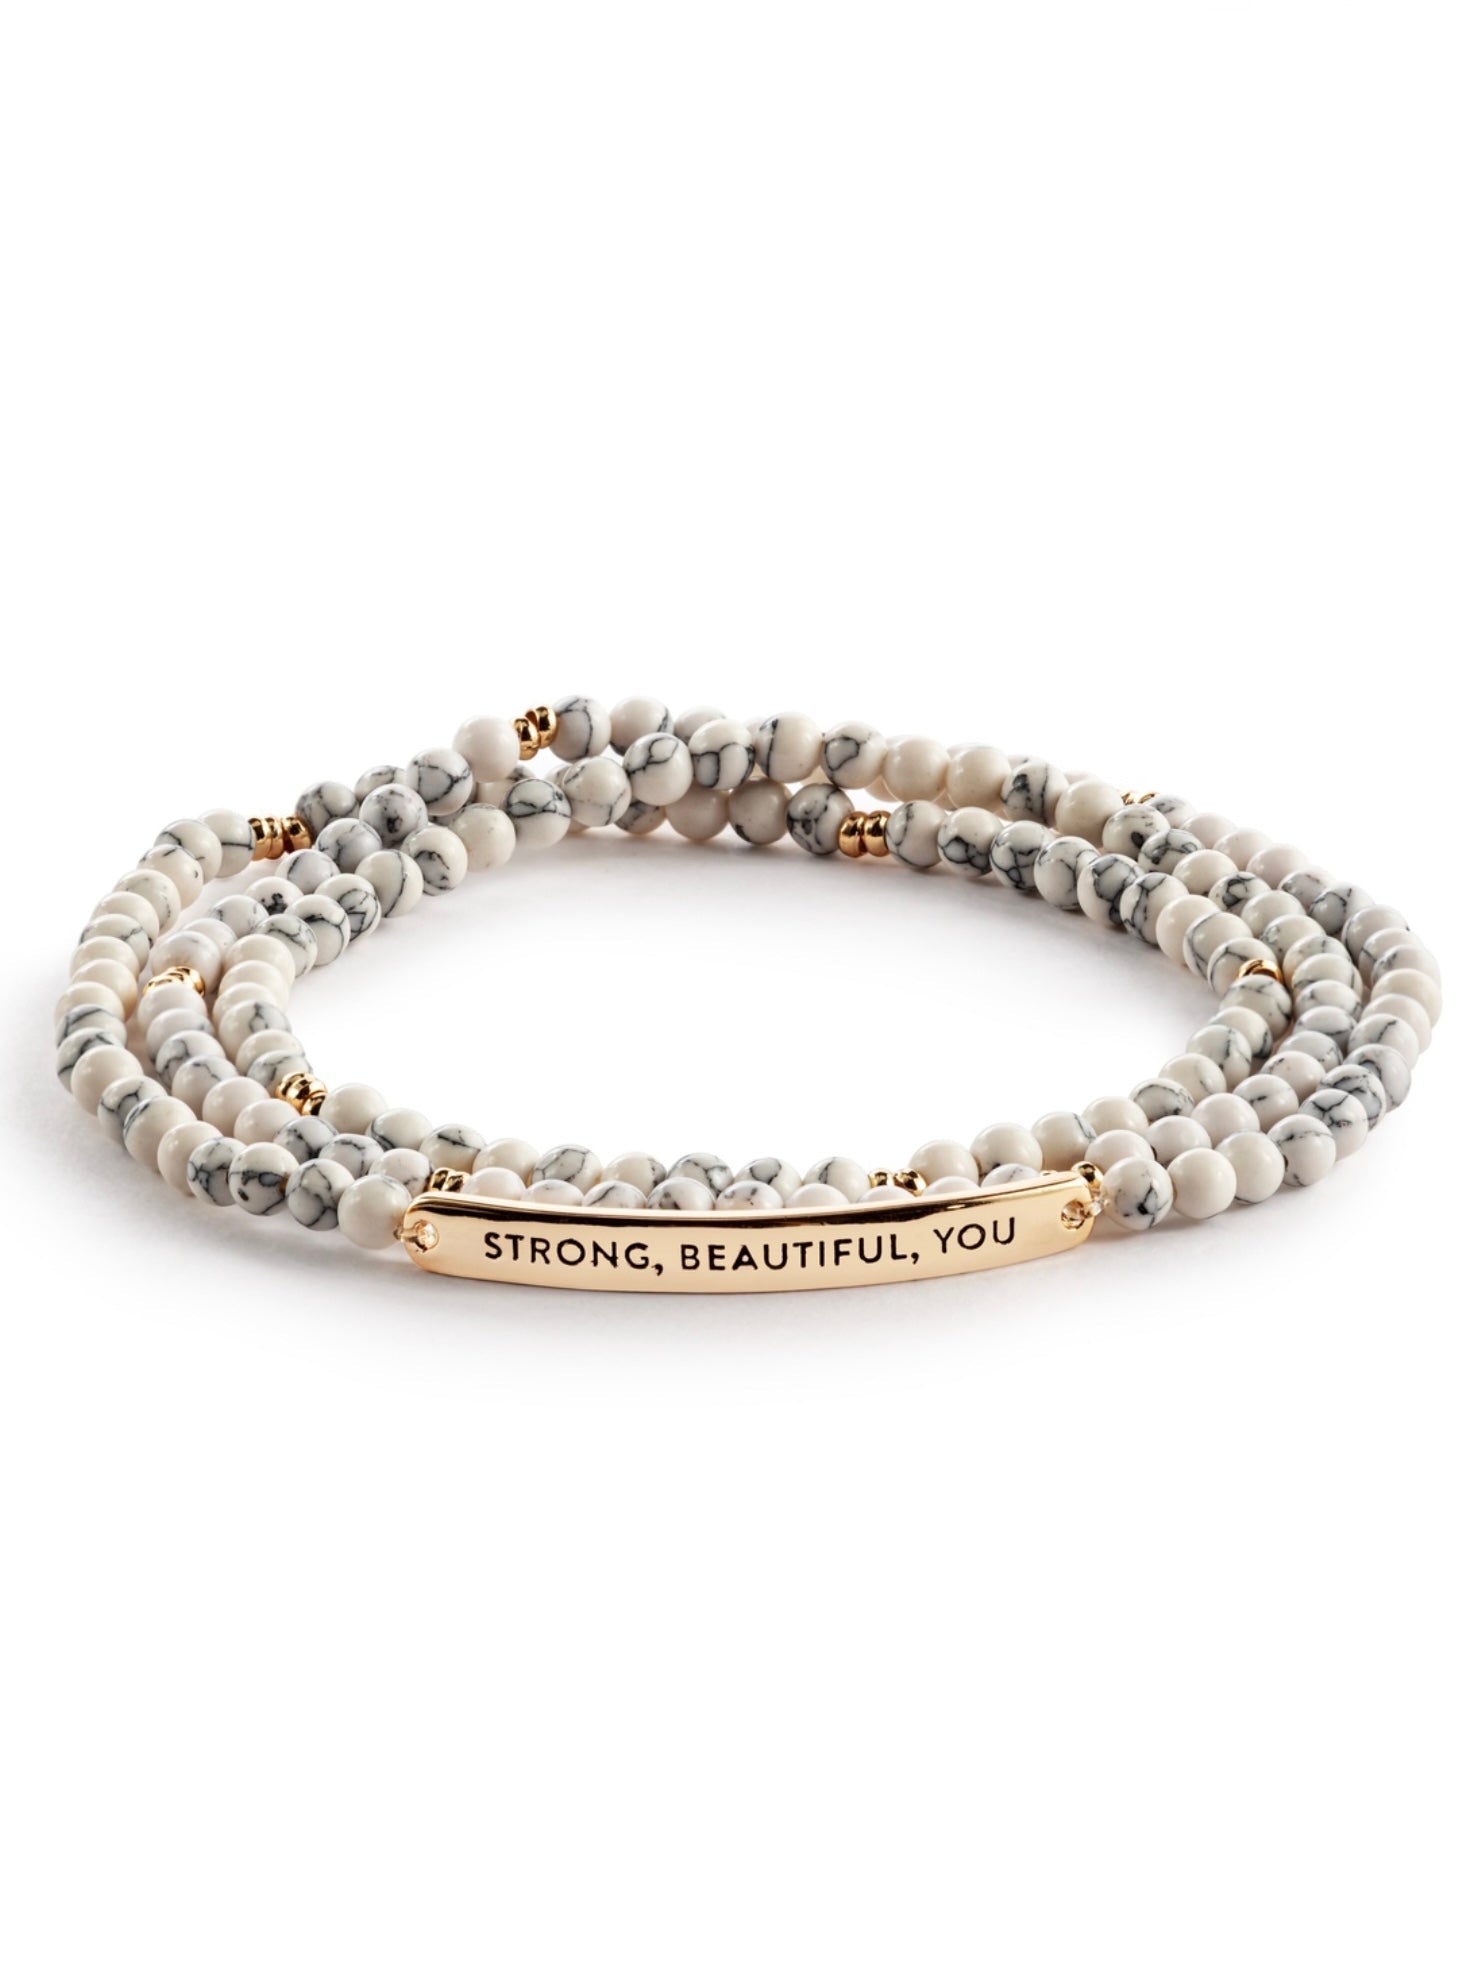 Strong, Beautiful, You Necklace/Bracelet - White